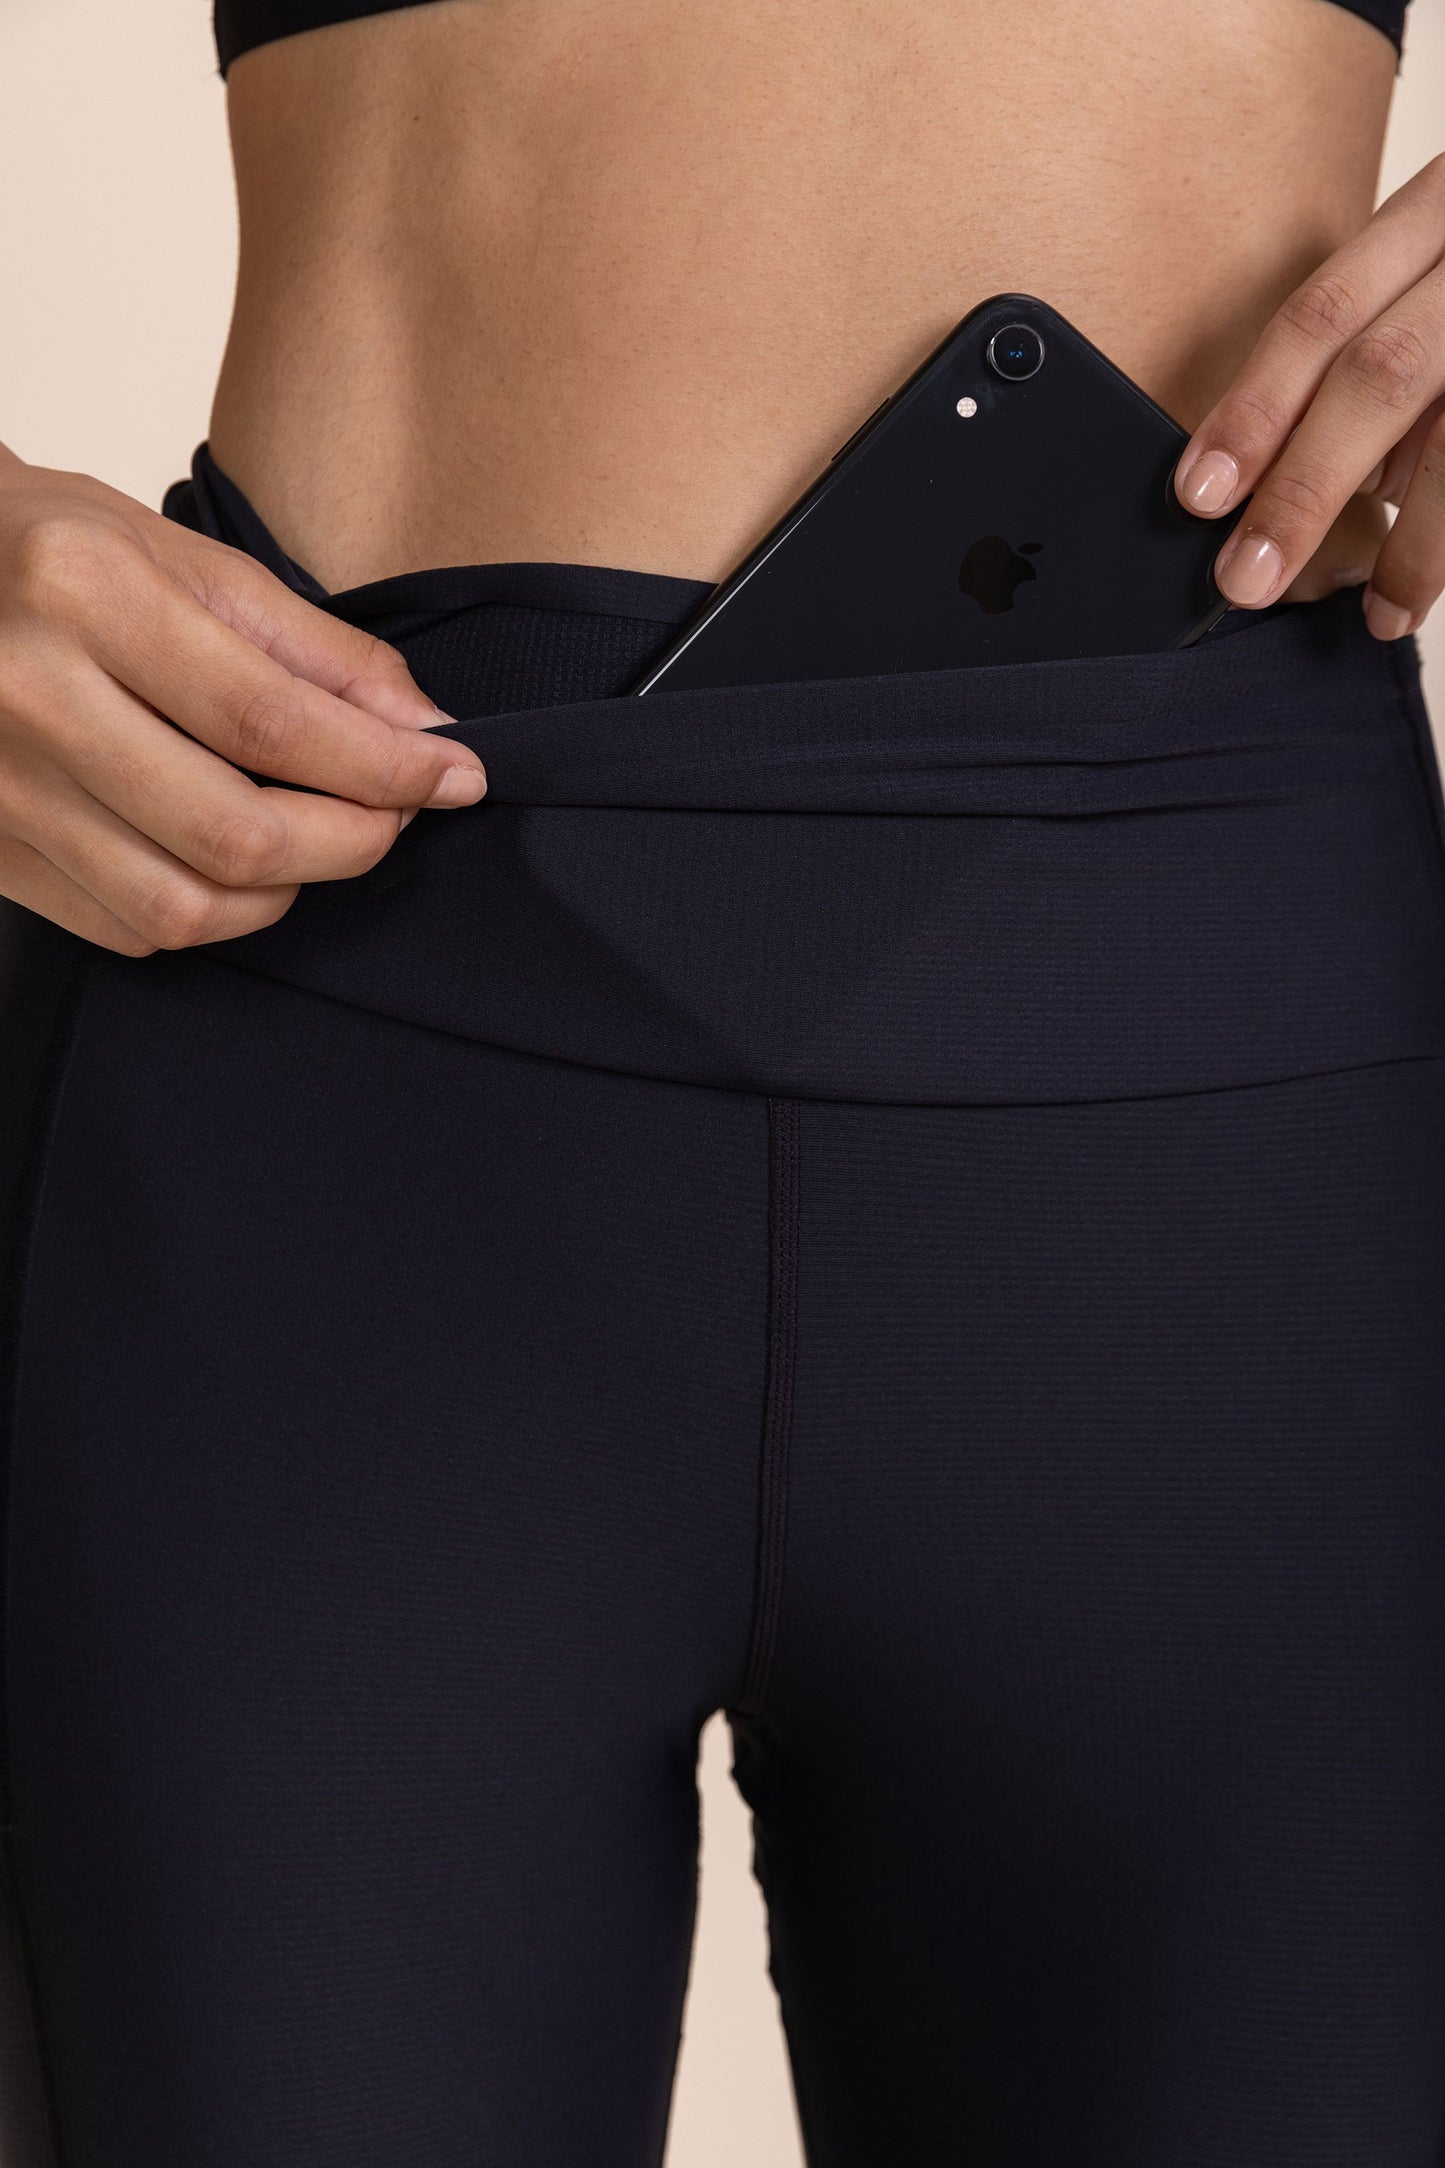 Person inserting a smartphone into a pocket on the waistband of the black "Legging 6 Pockets Speed" activewear.